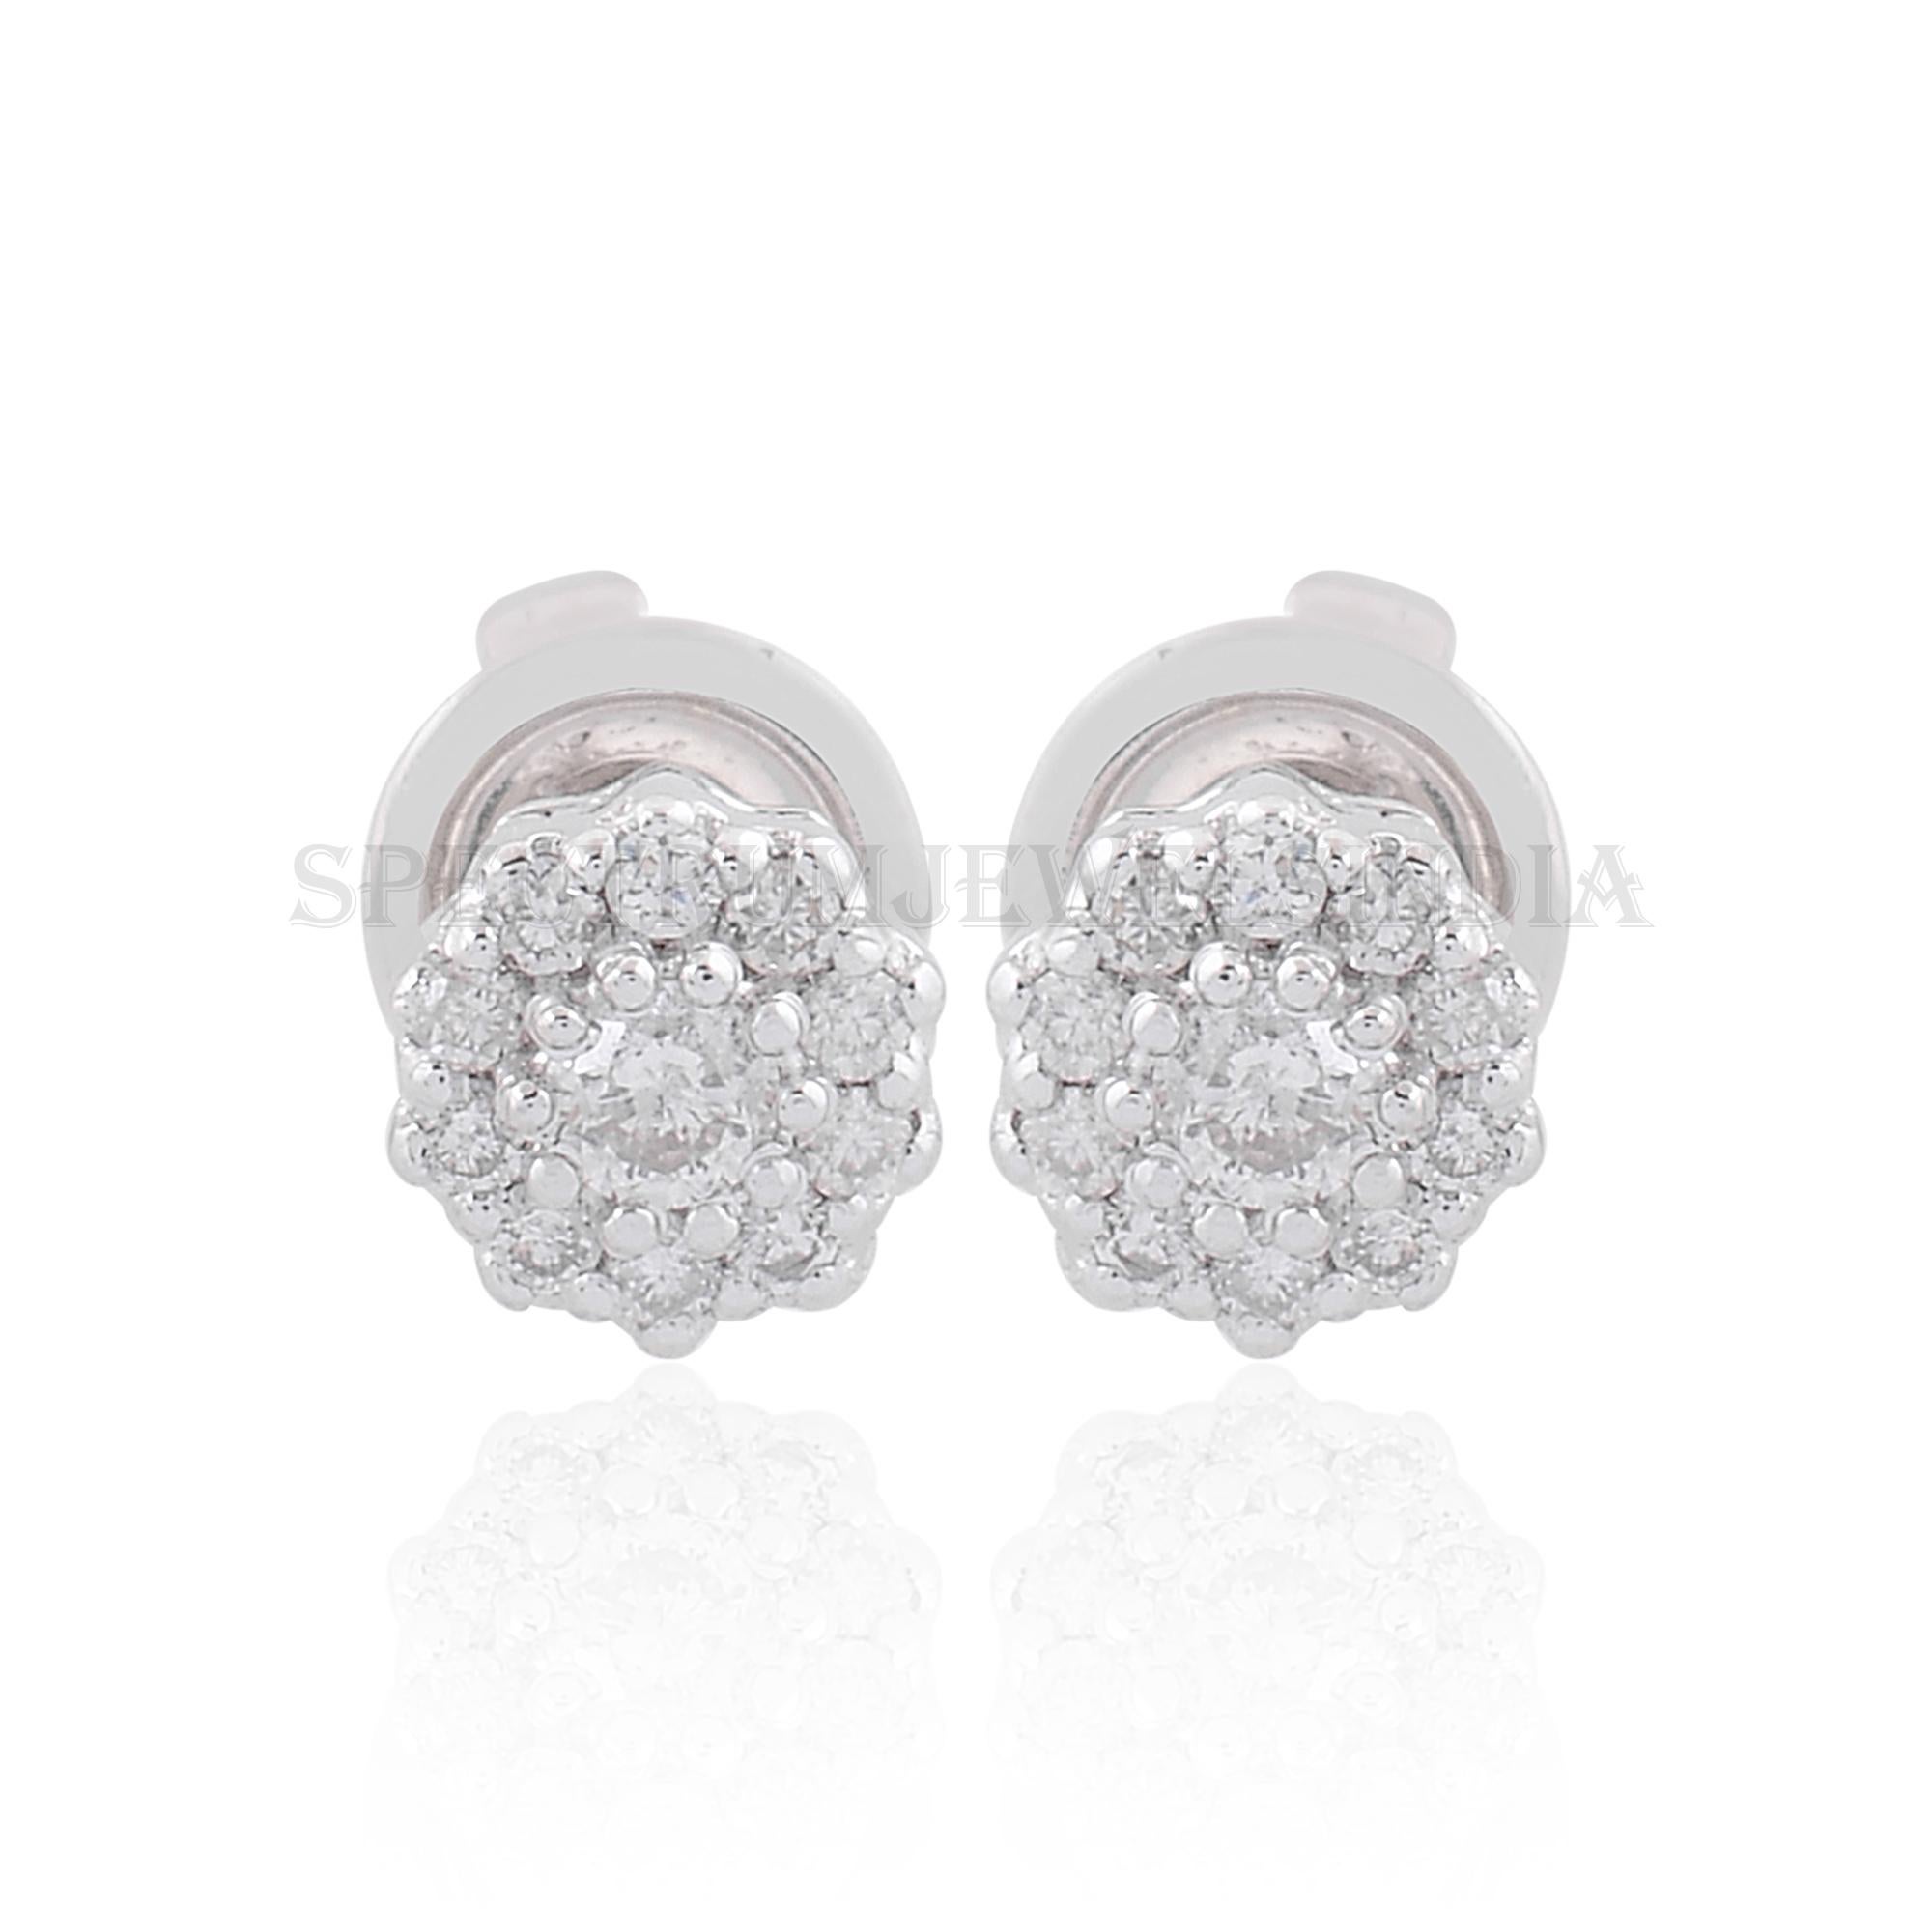 Indulge in timeless elegance with these exquisite Natural Round Diamond Stud Earrings, meticulously crafted in 18 Karat White Gold by skilled artisans to adorn your ears with brilliance and sophistication.

Item Code :- SEE-1603
Gross Wt. :- 1.82